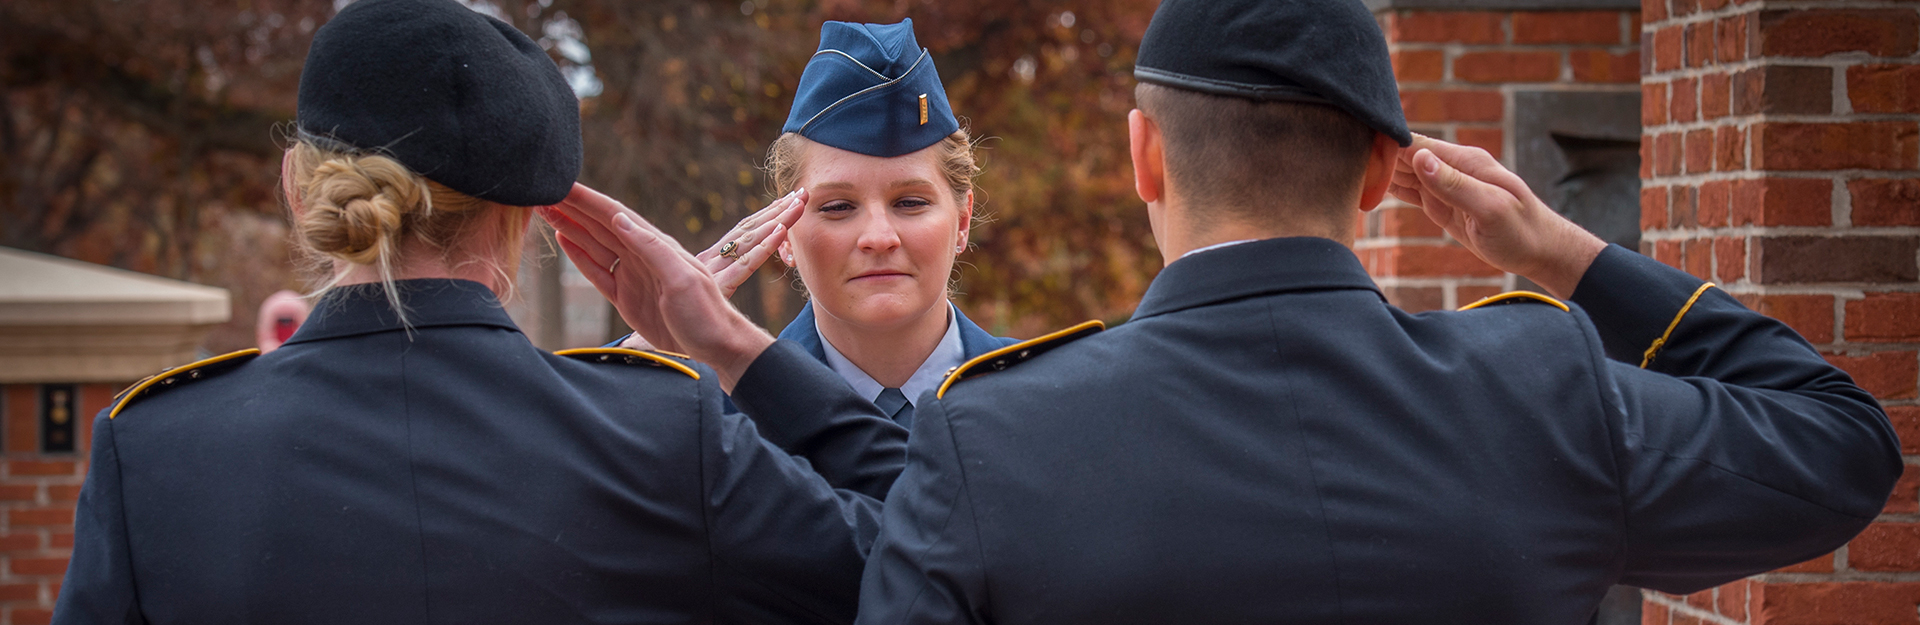 Female cadet in dress uniform saluting male and female officer.